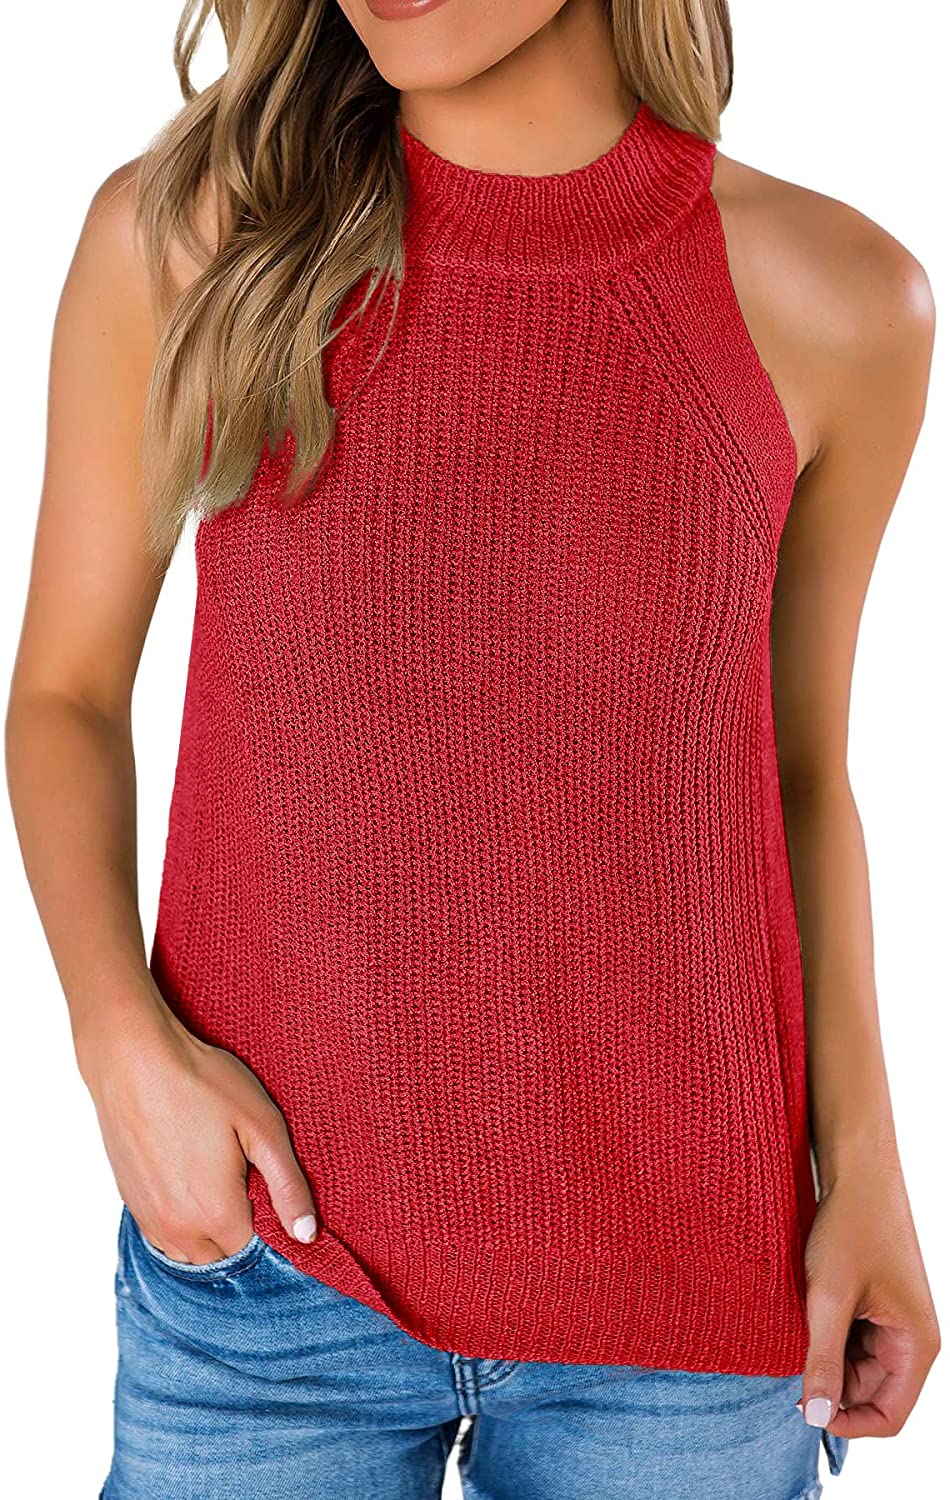 SySea Knit Halter Tank Top Was Totally Made for the Summer Heat